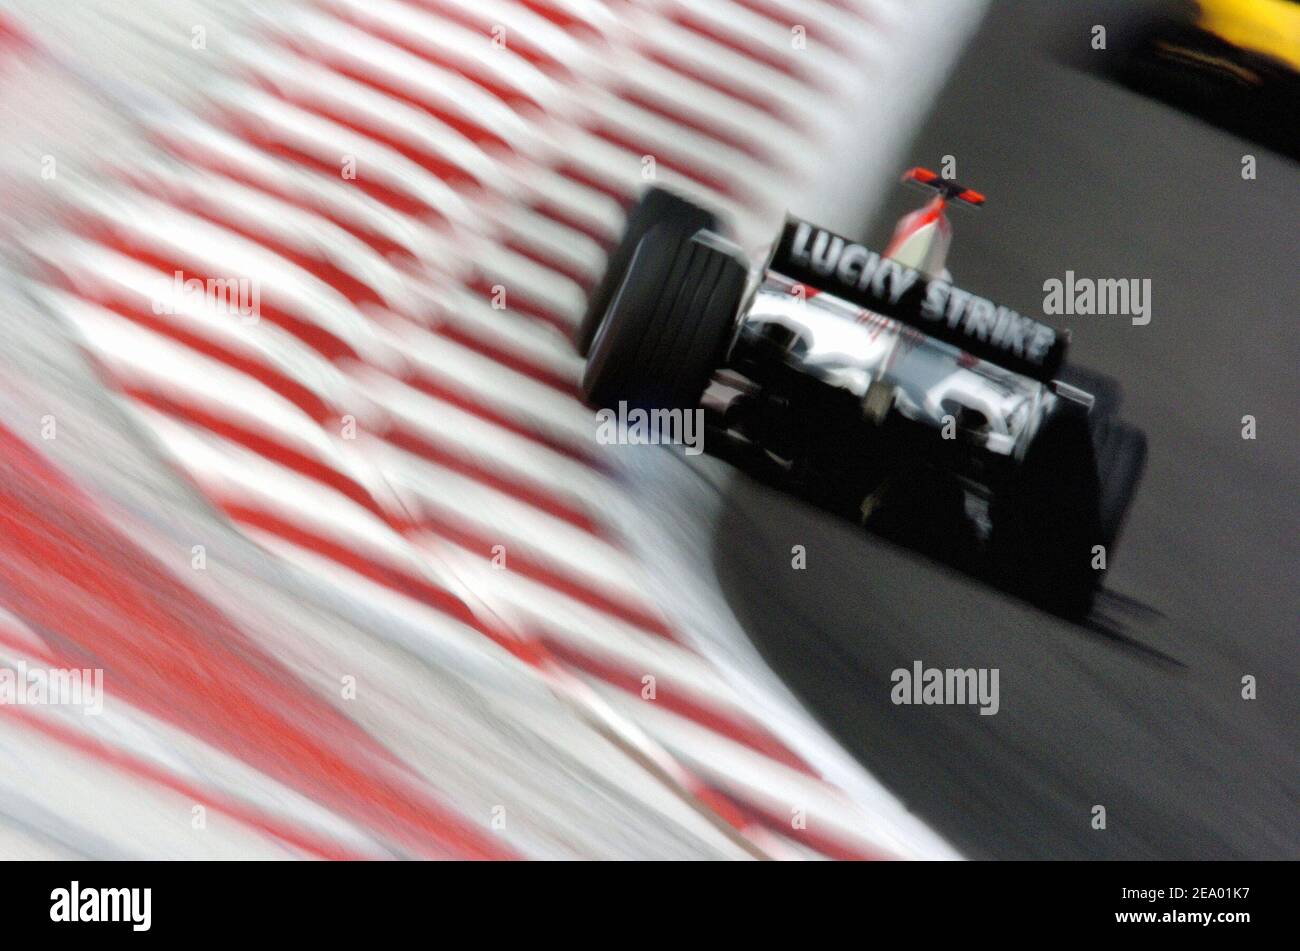 U.K Formula 1 driver Jenson Button (Bar team) during the formula 1 Grand Prix in Sakhir, Bahrein, United Arab Emirates, on April 4, 2004. Photo by Thierry Gromik/ABACA. Stock Photo